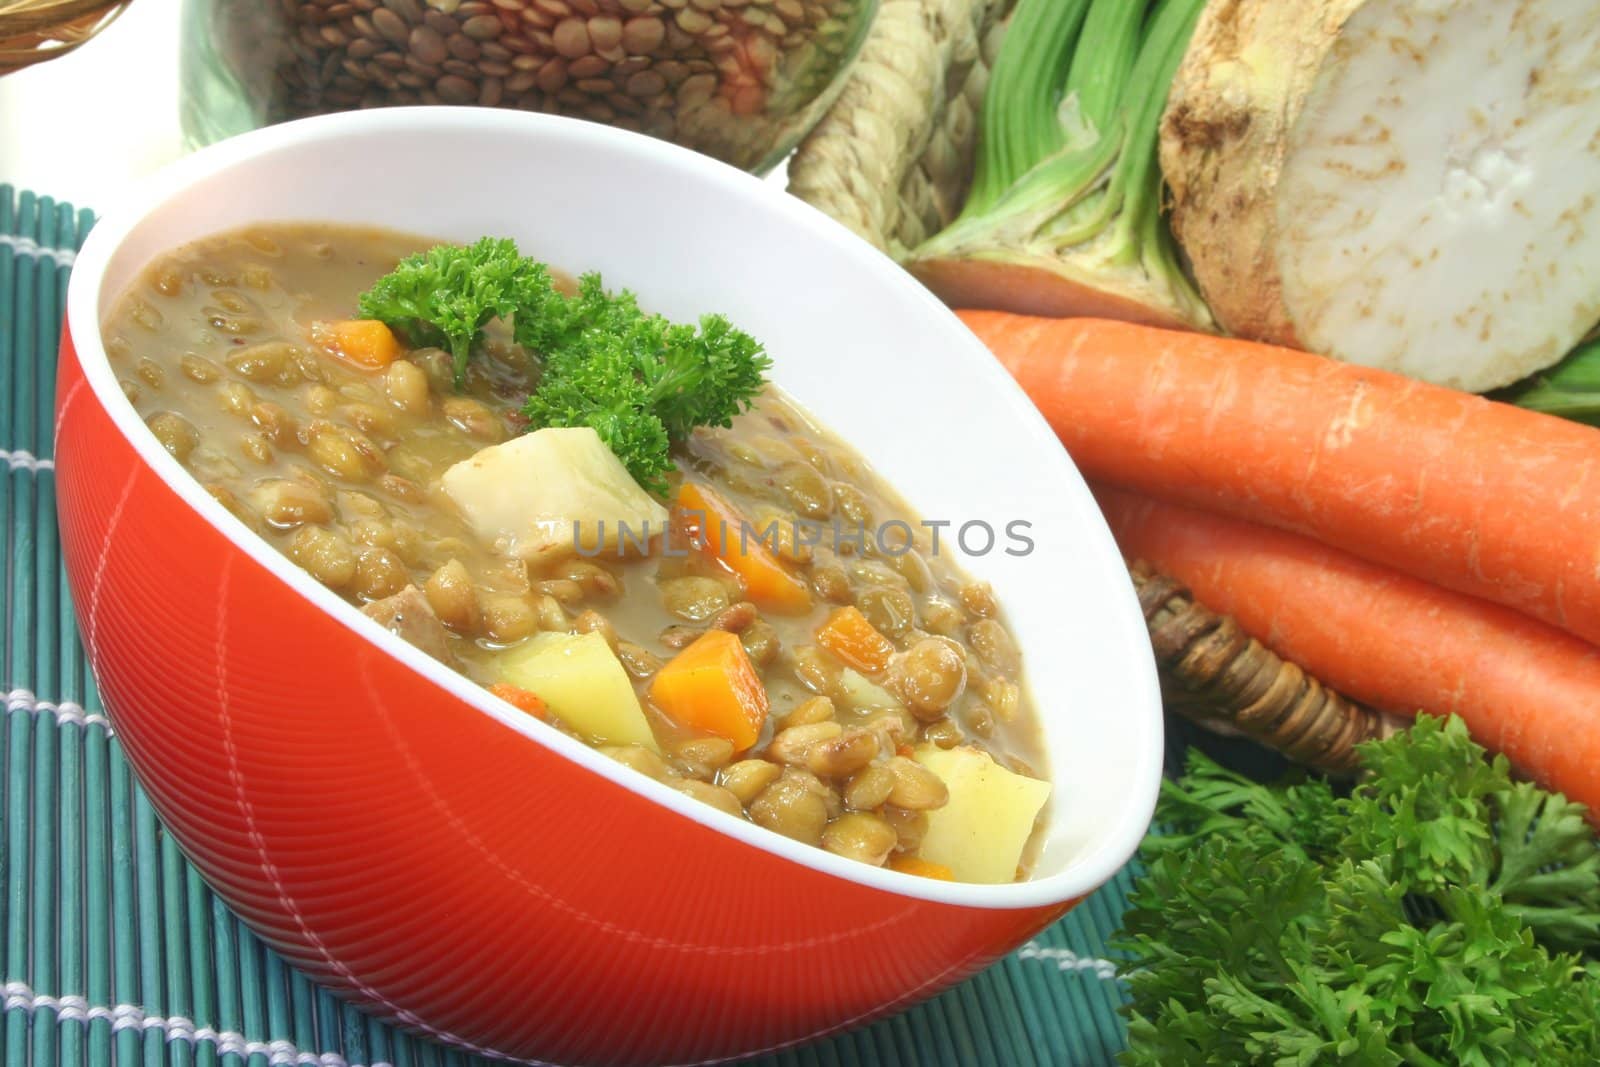 Lentil stew with potatoes, carrots and parsley